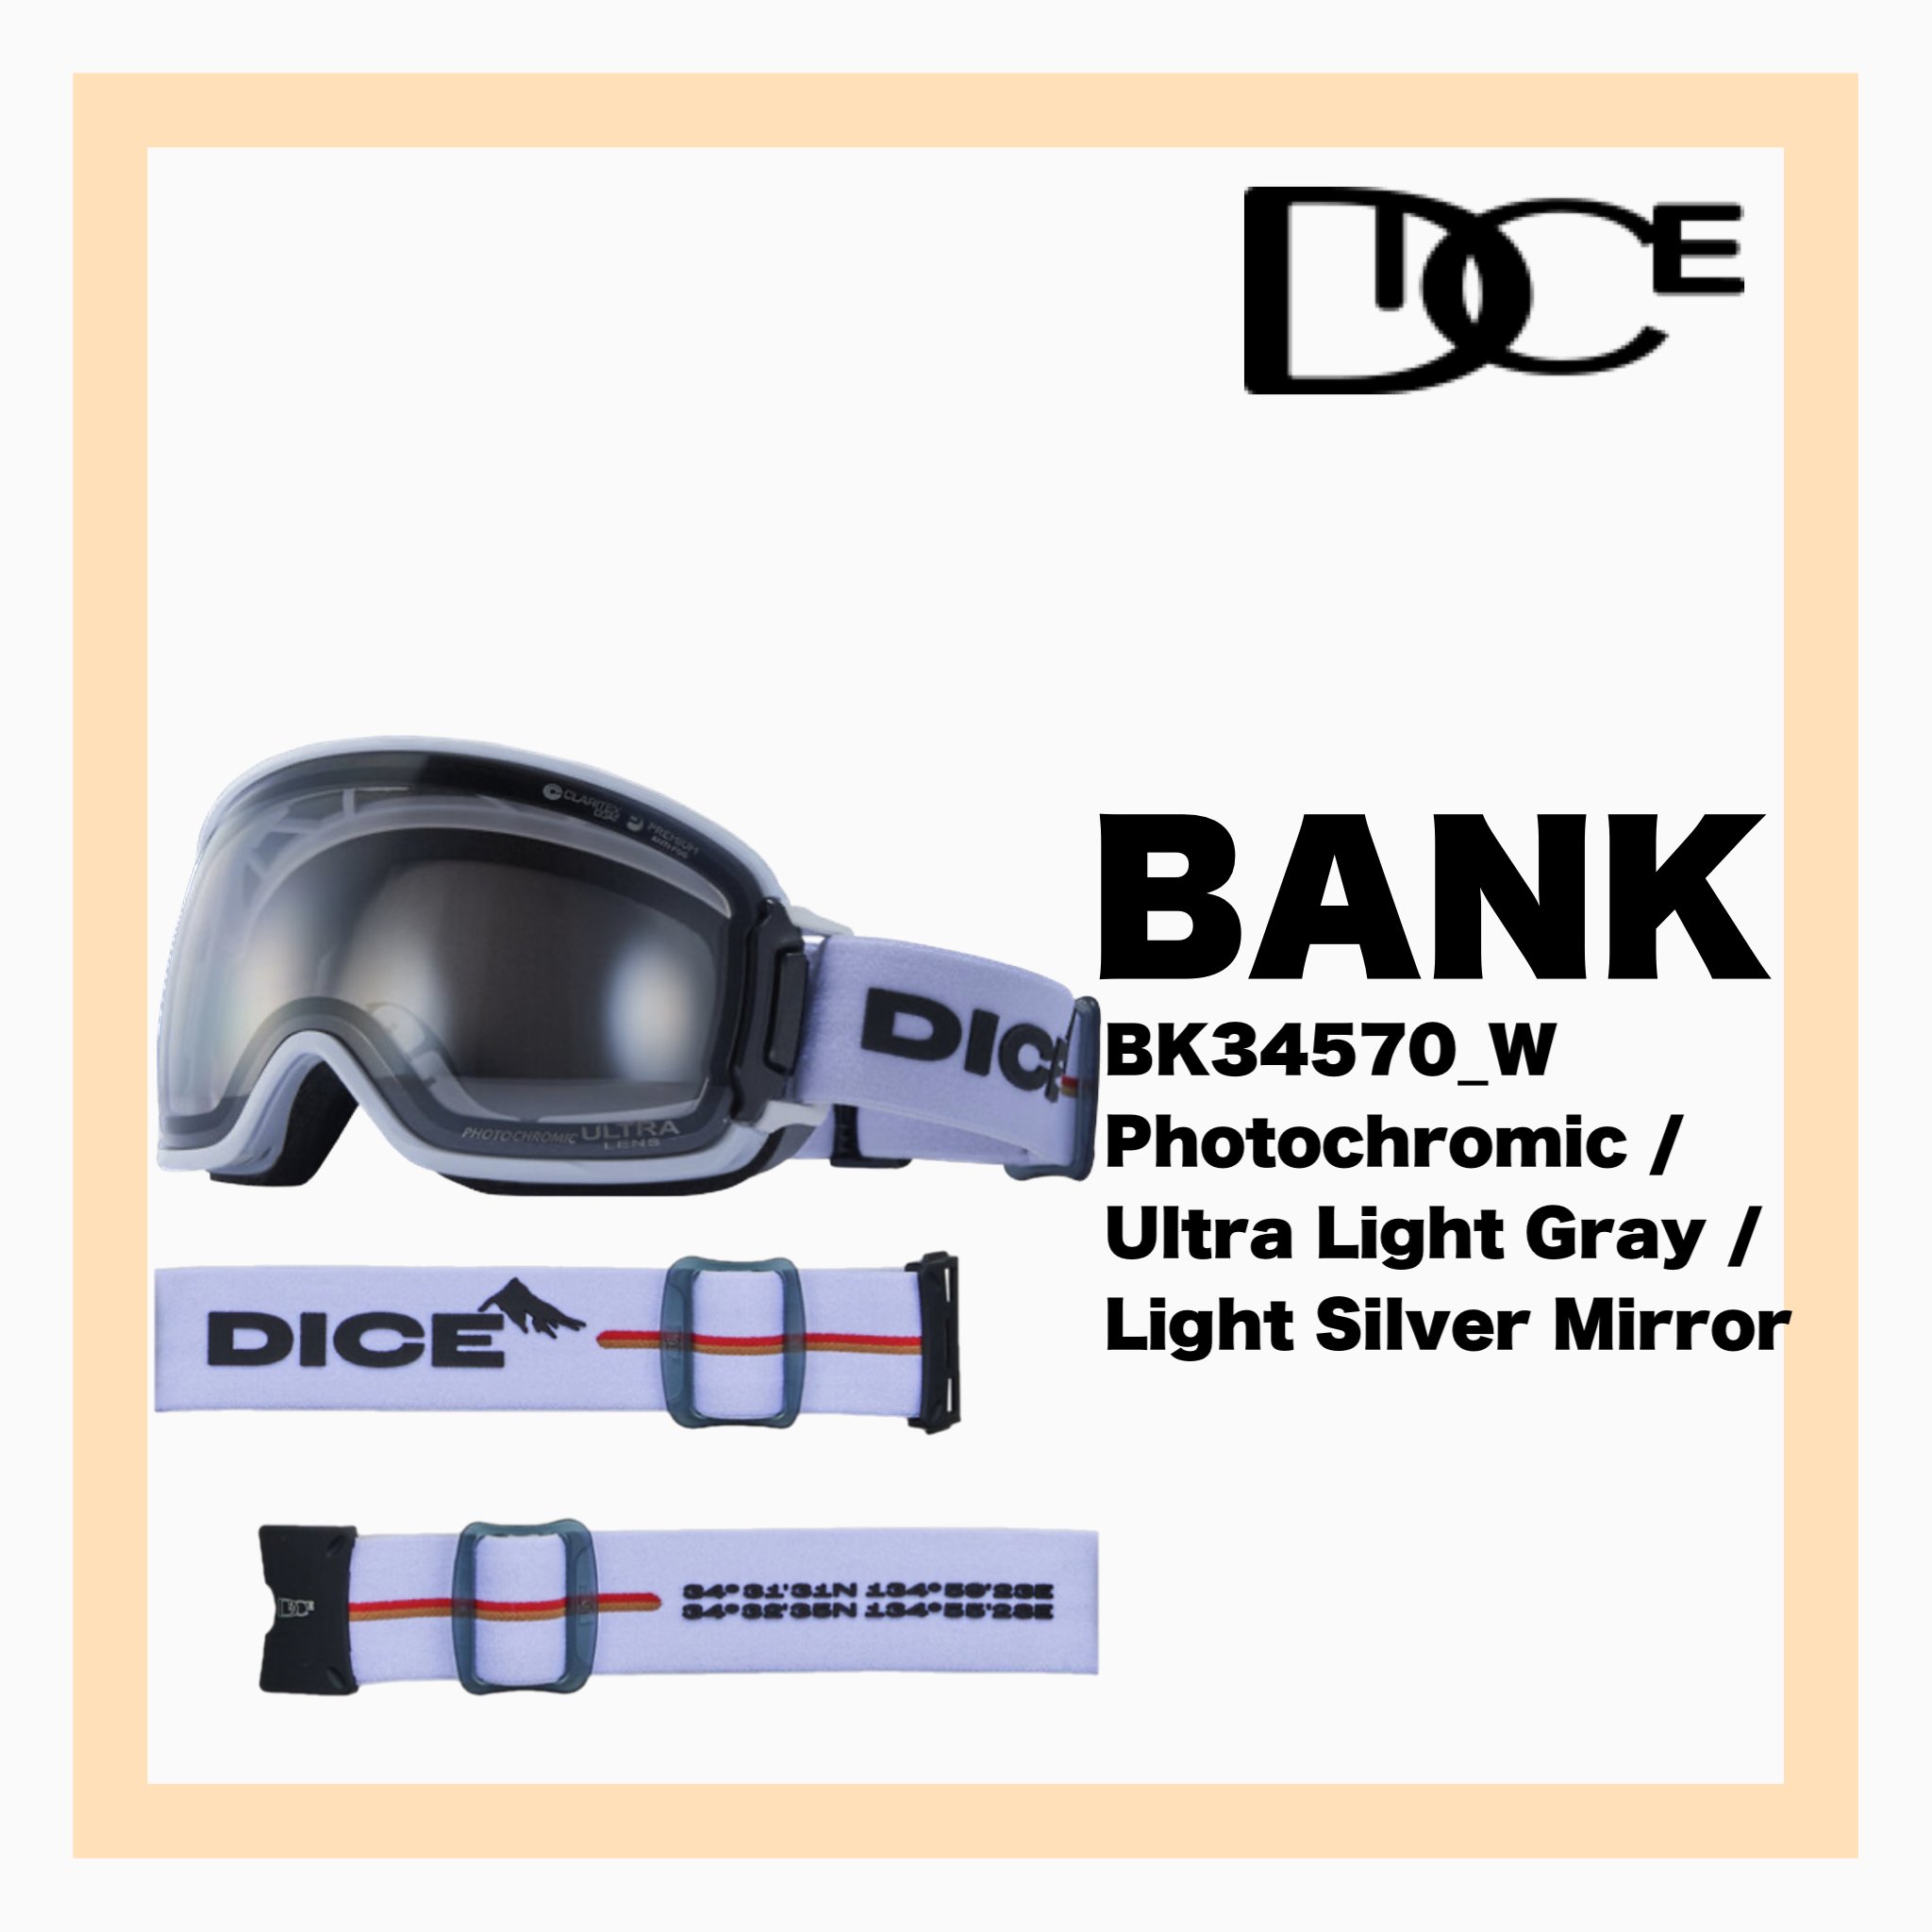 <img class='new_mark_img1' src='https://img.shop-pro.jp/img/new/icons34.gif' style='border:none;display:inline;margin:0px;padding:0px;width:auto;' />DICE BANK W Photochromic /Ultra Light Gray / Light Silver Mirror